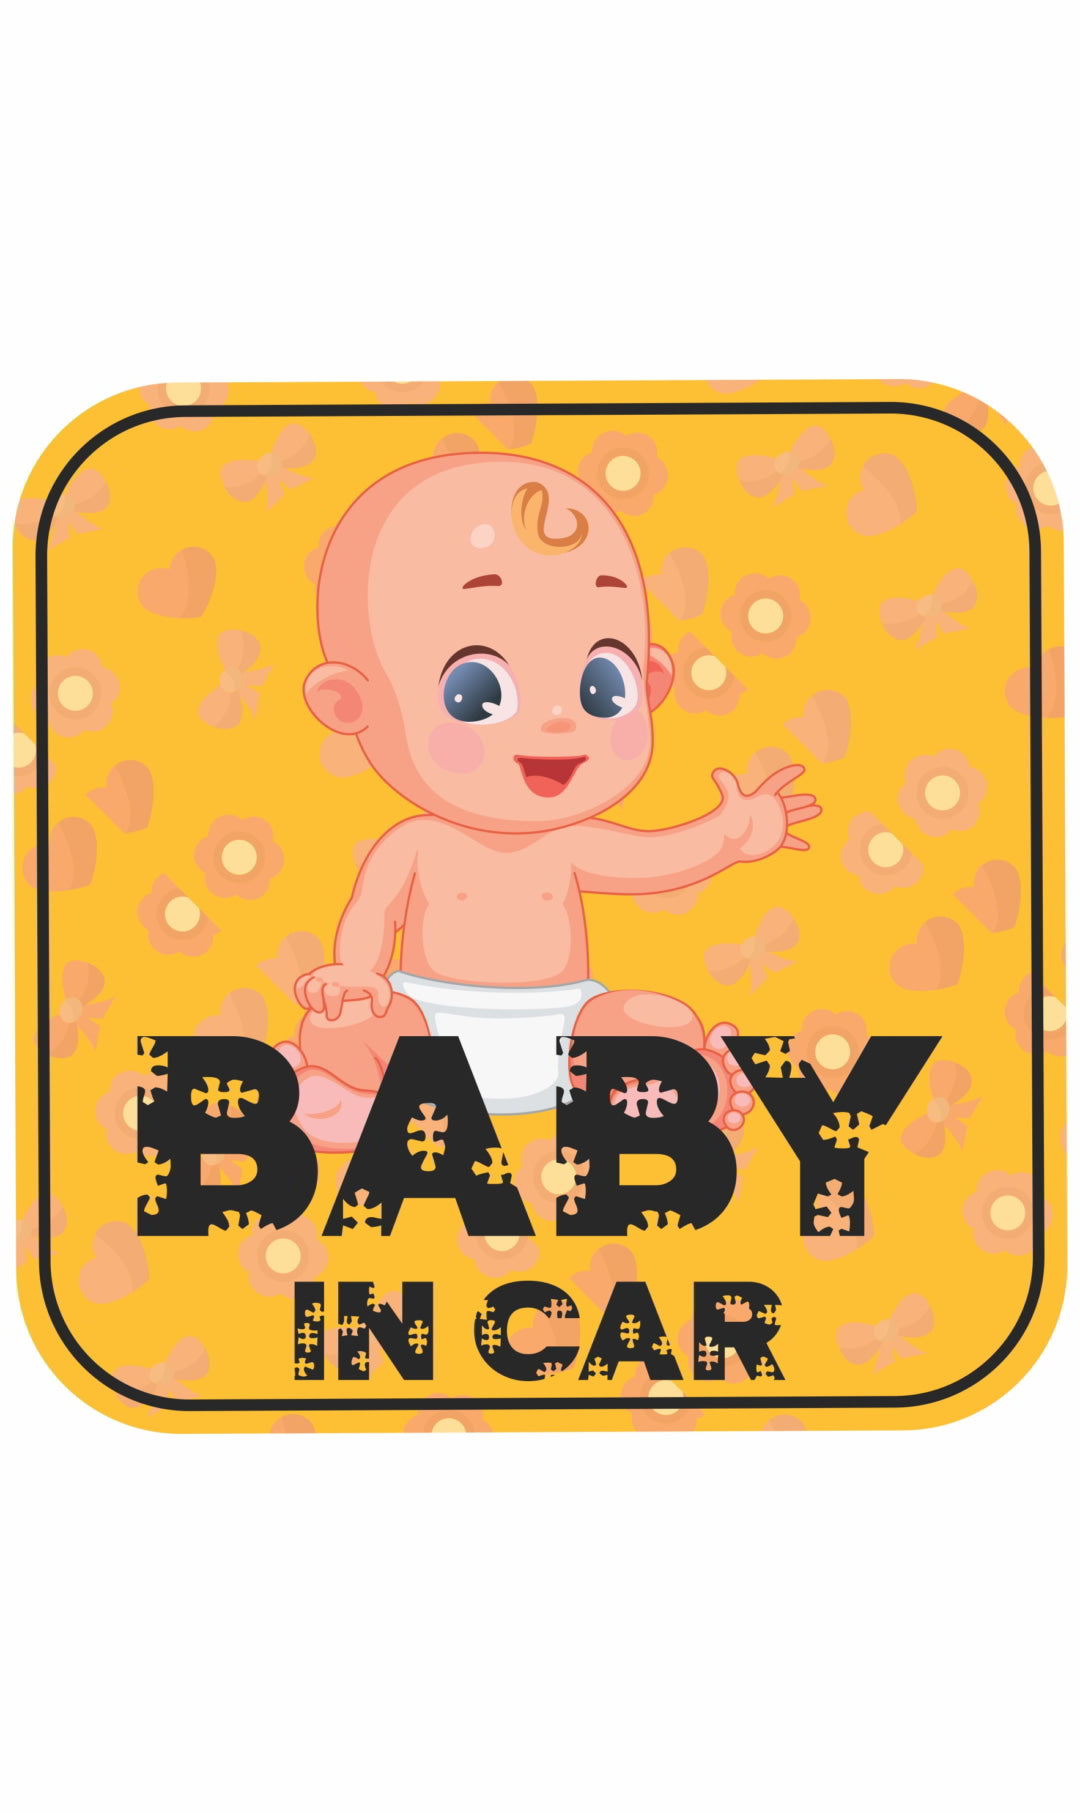 Baby in Car Decal Sticker(2pc)_c32